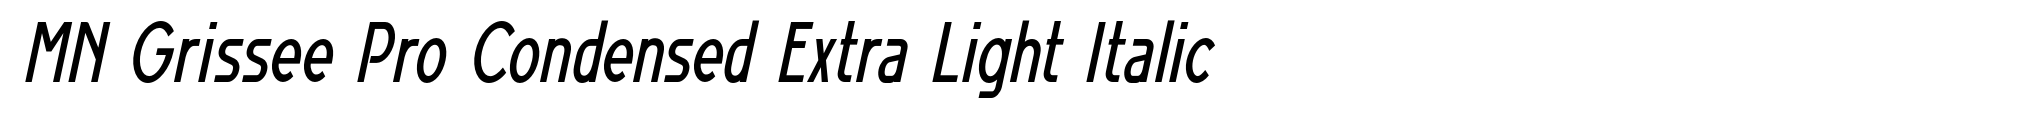 MN Grissee Pro Condensed Extra Light Italic image